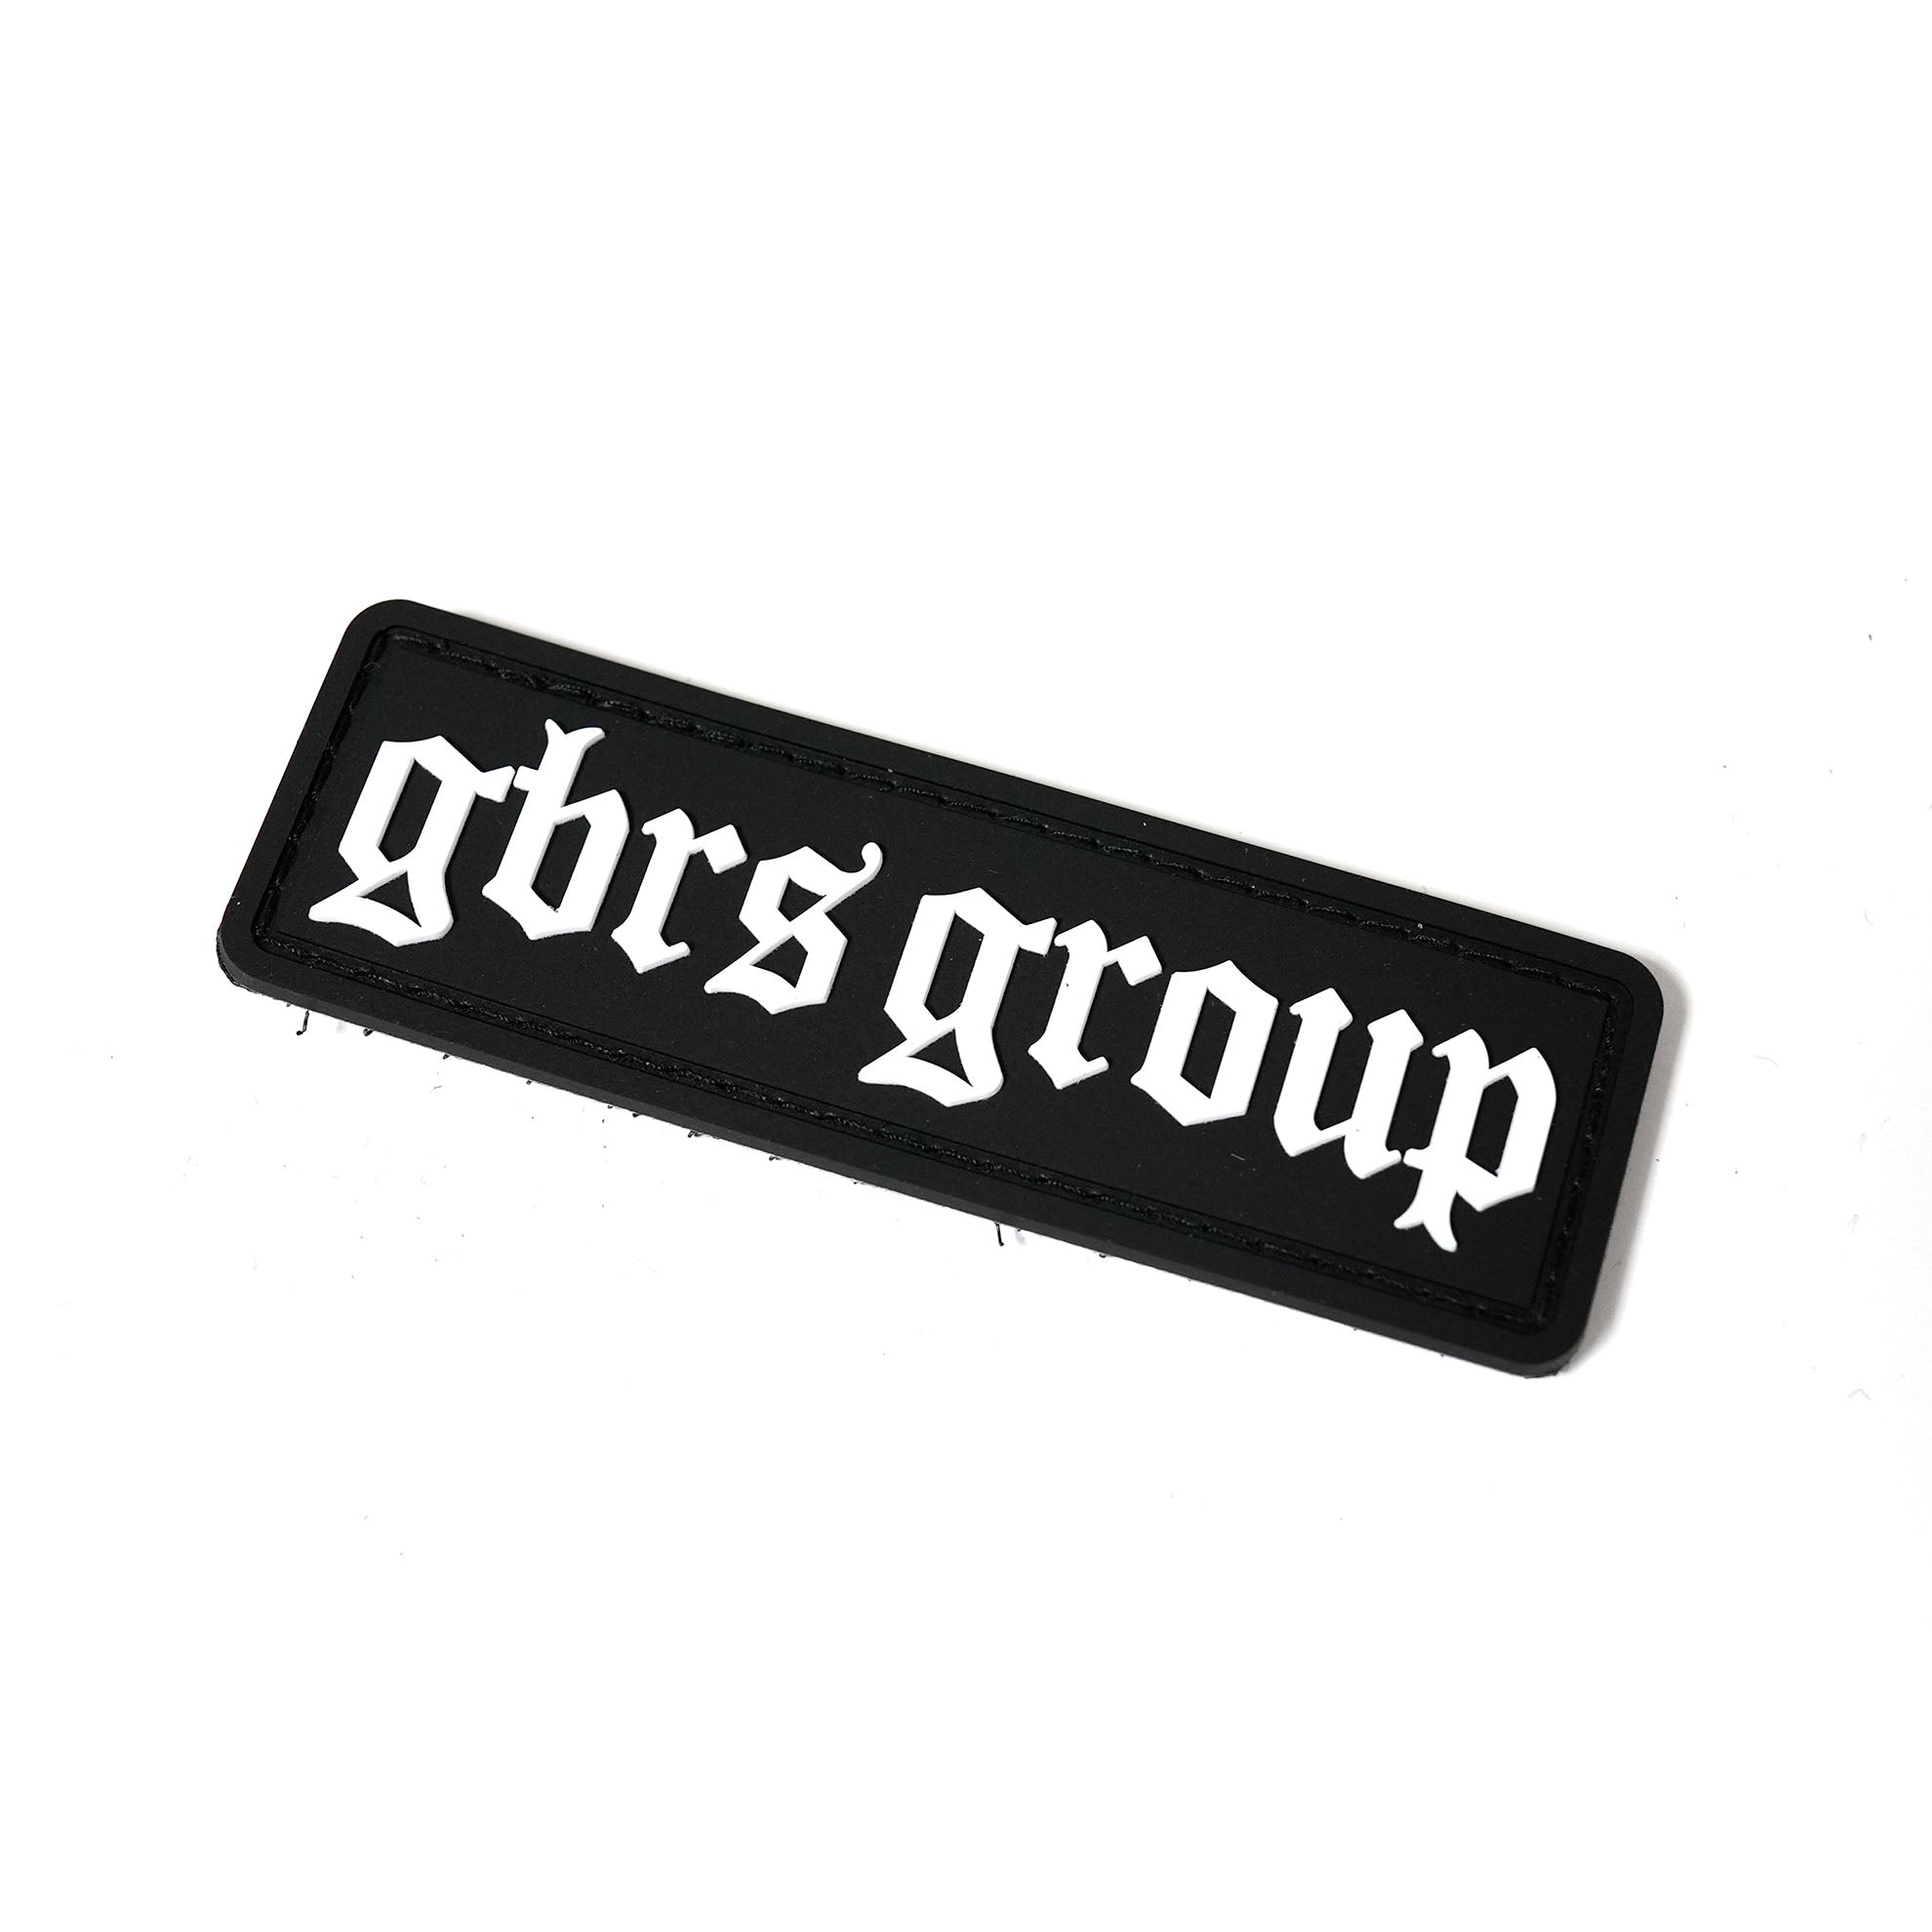 GBRS Group PVC Patch – geartles